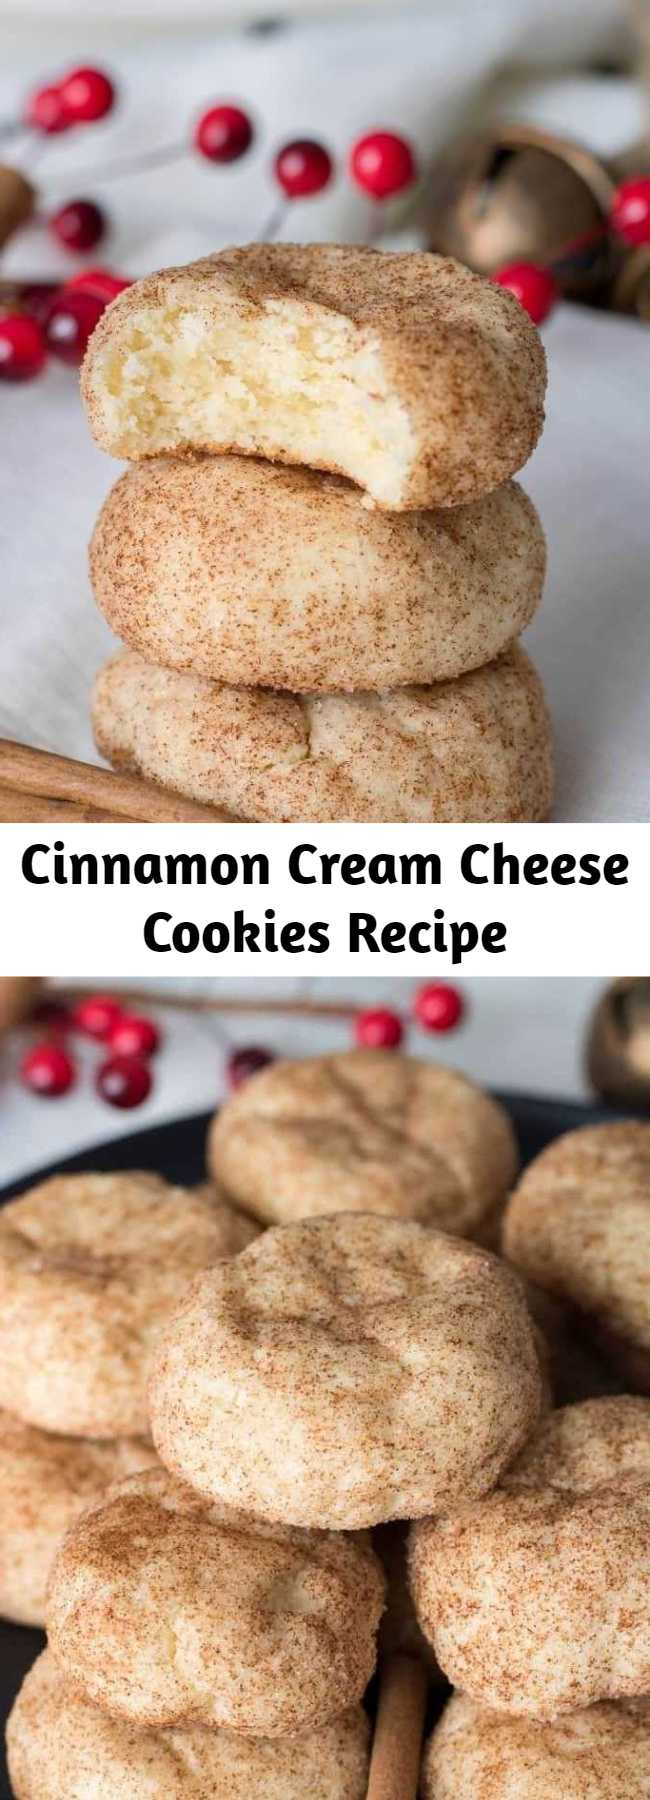 Cinnamon Cream Cheese Cookies Recipe - Cinnamon Cream Cheese Cookies, an easy, tender cookie bursting with cinnamon sugar. These cinnamon cream cheese cookies make for the perfect Christmas (or anytime!) cookie!